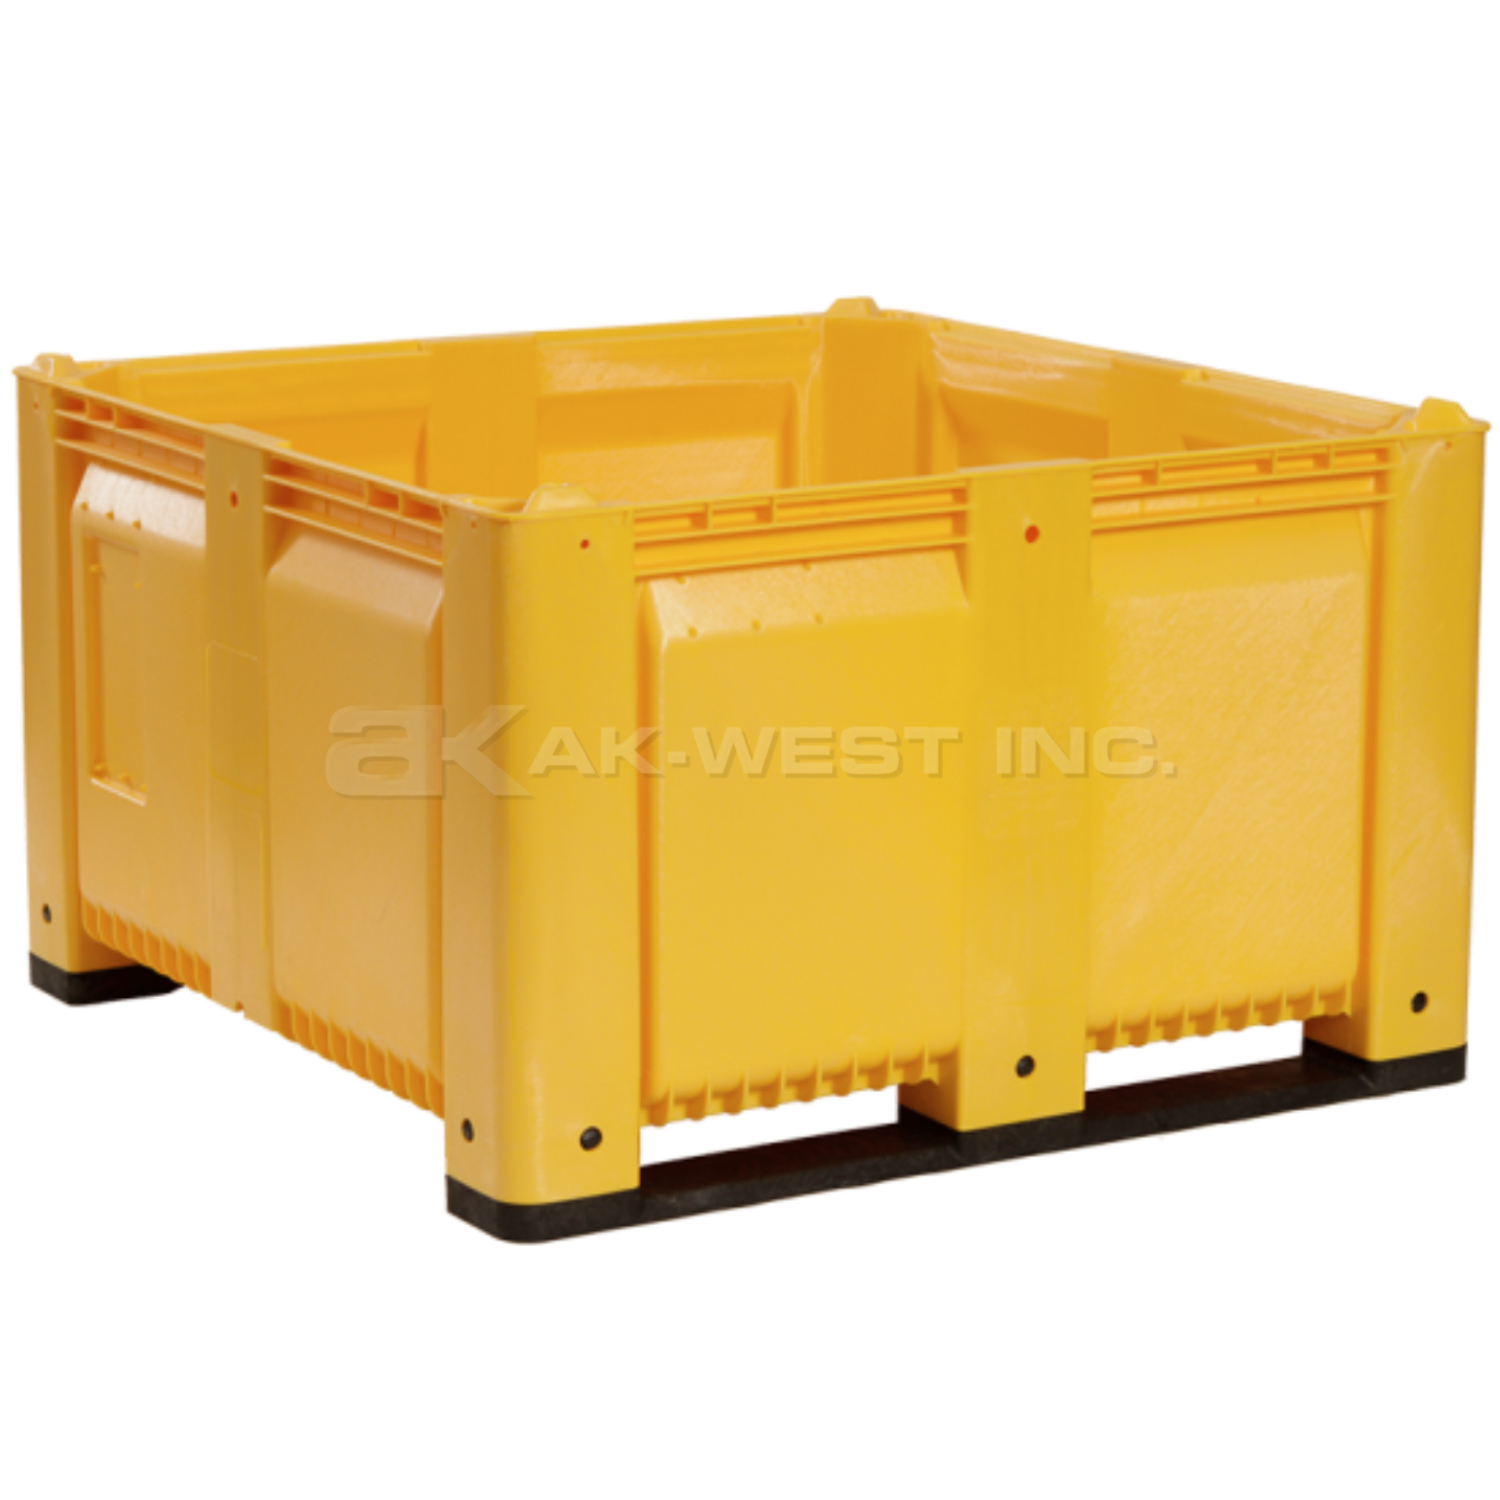 Yellow, 48"L x 48"W x 28.5"H Bulk Container w/ Solid Sides and Base